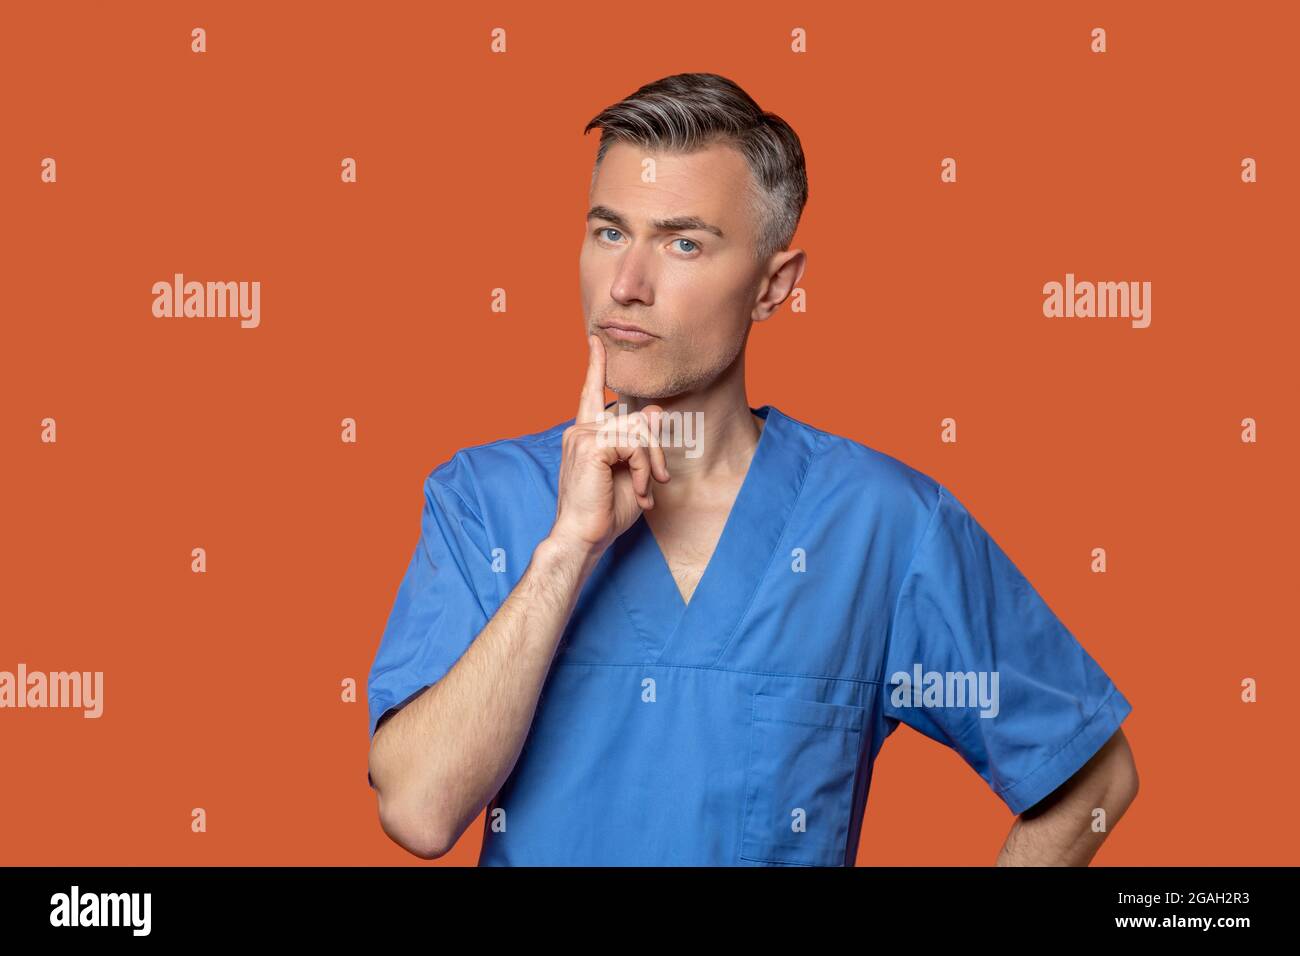 Pensive smart man in medical clothes Stock Photo